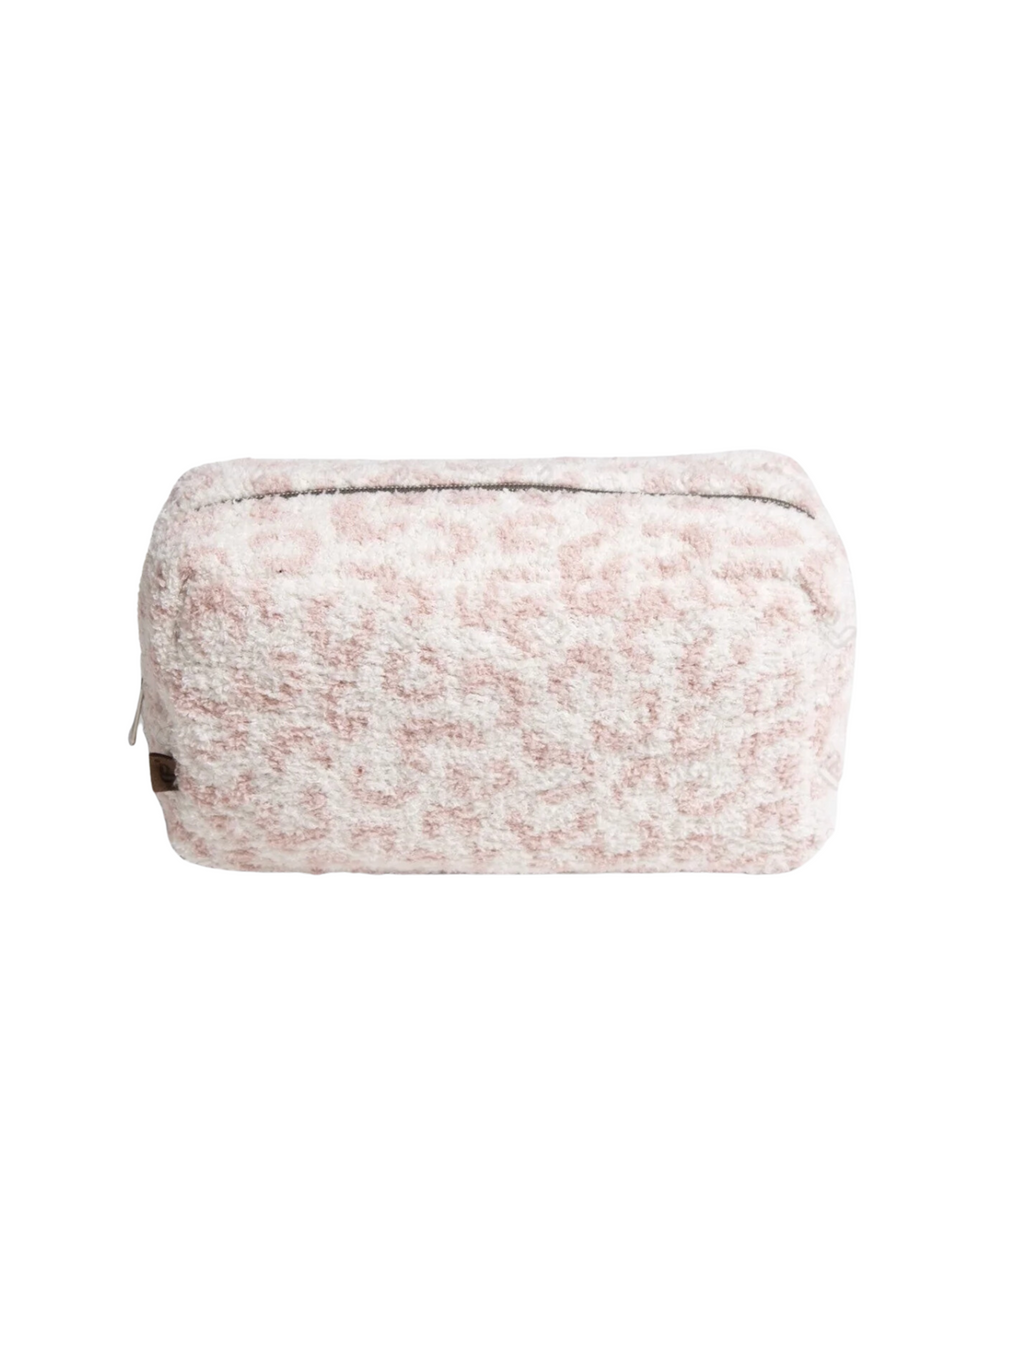 Leopard Travel Pouch - Pink